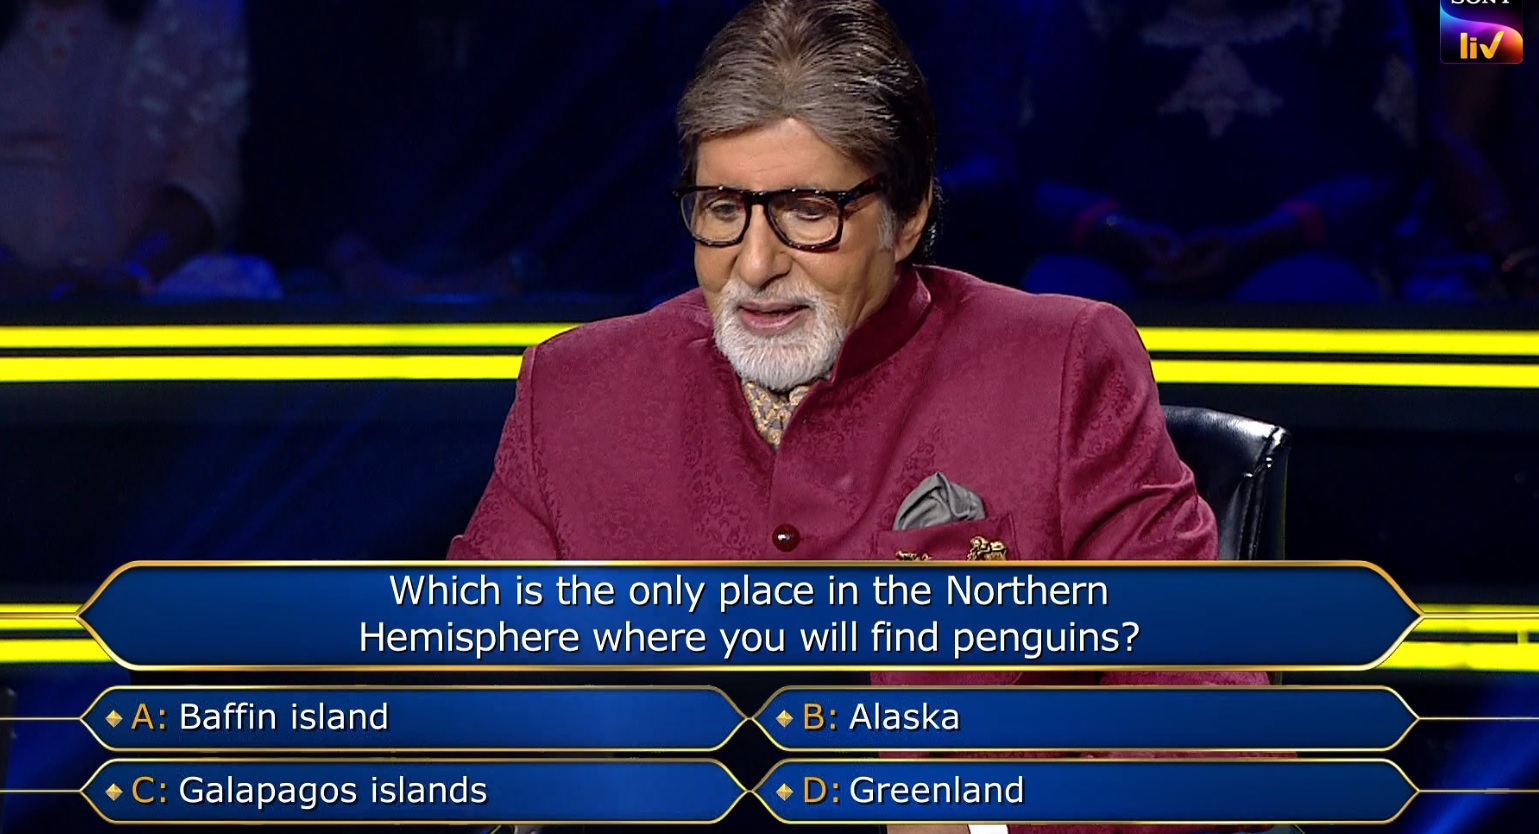 Ques : Which of the only place in the Northern Hemisphere where you will find penguins?